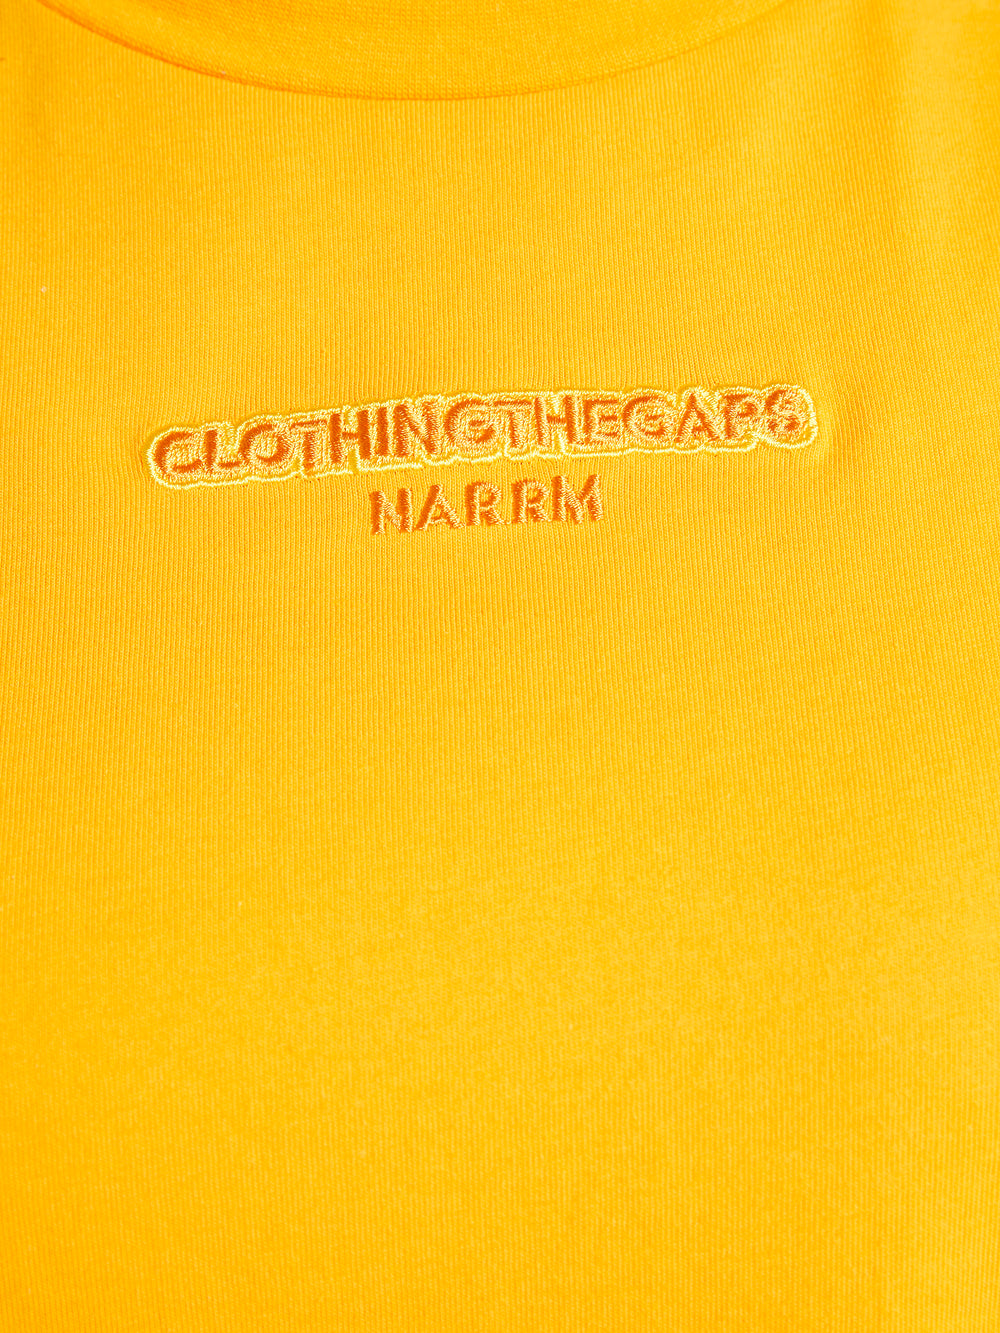 Clothing The Gaps. Sun Tee. Yellow T-shirt. With embroidered 'Clothing The Gaps' on front chest with minimalist font in a contrasting light yellow colour and 'Narrm' in a darker yellow embroidered underneath, acknowledging the land on which Clothing The Gaps operates it's social enterprise.